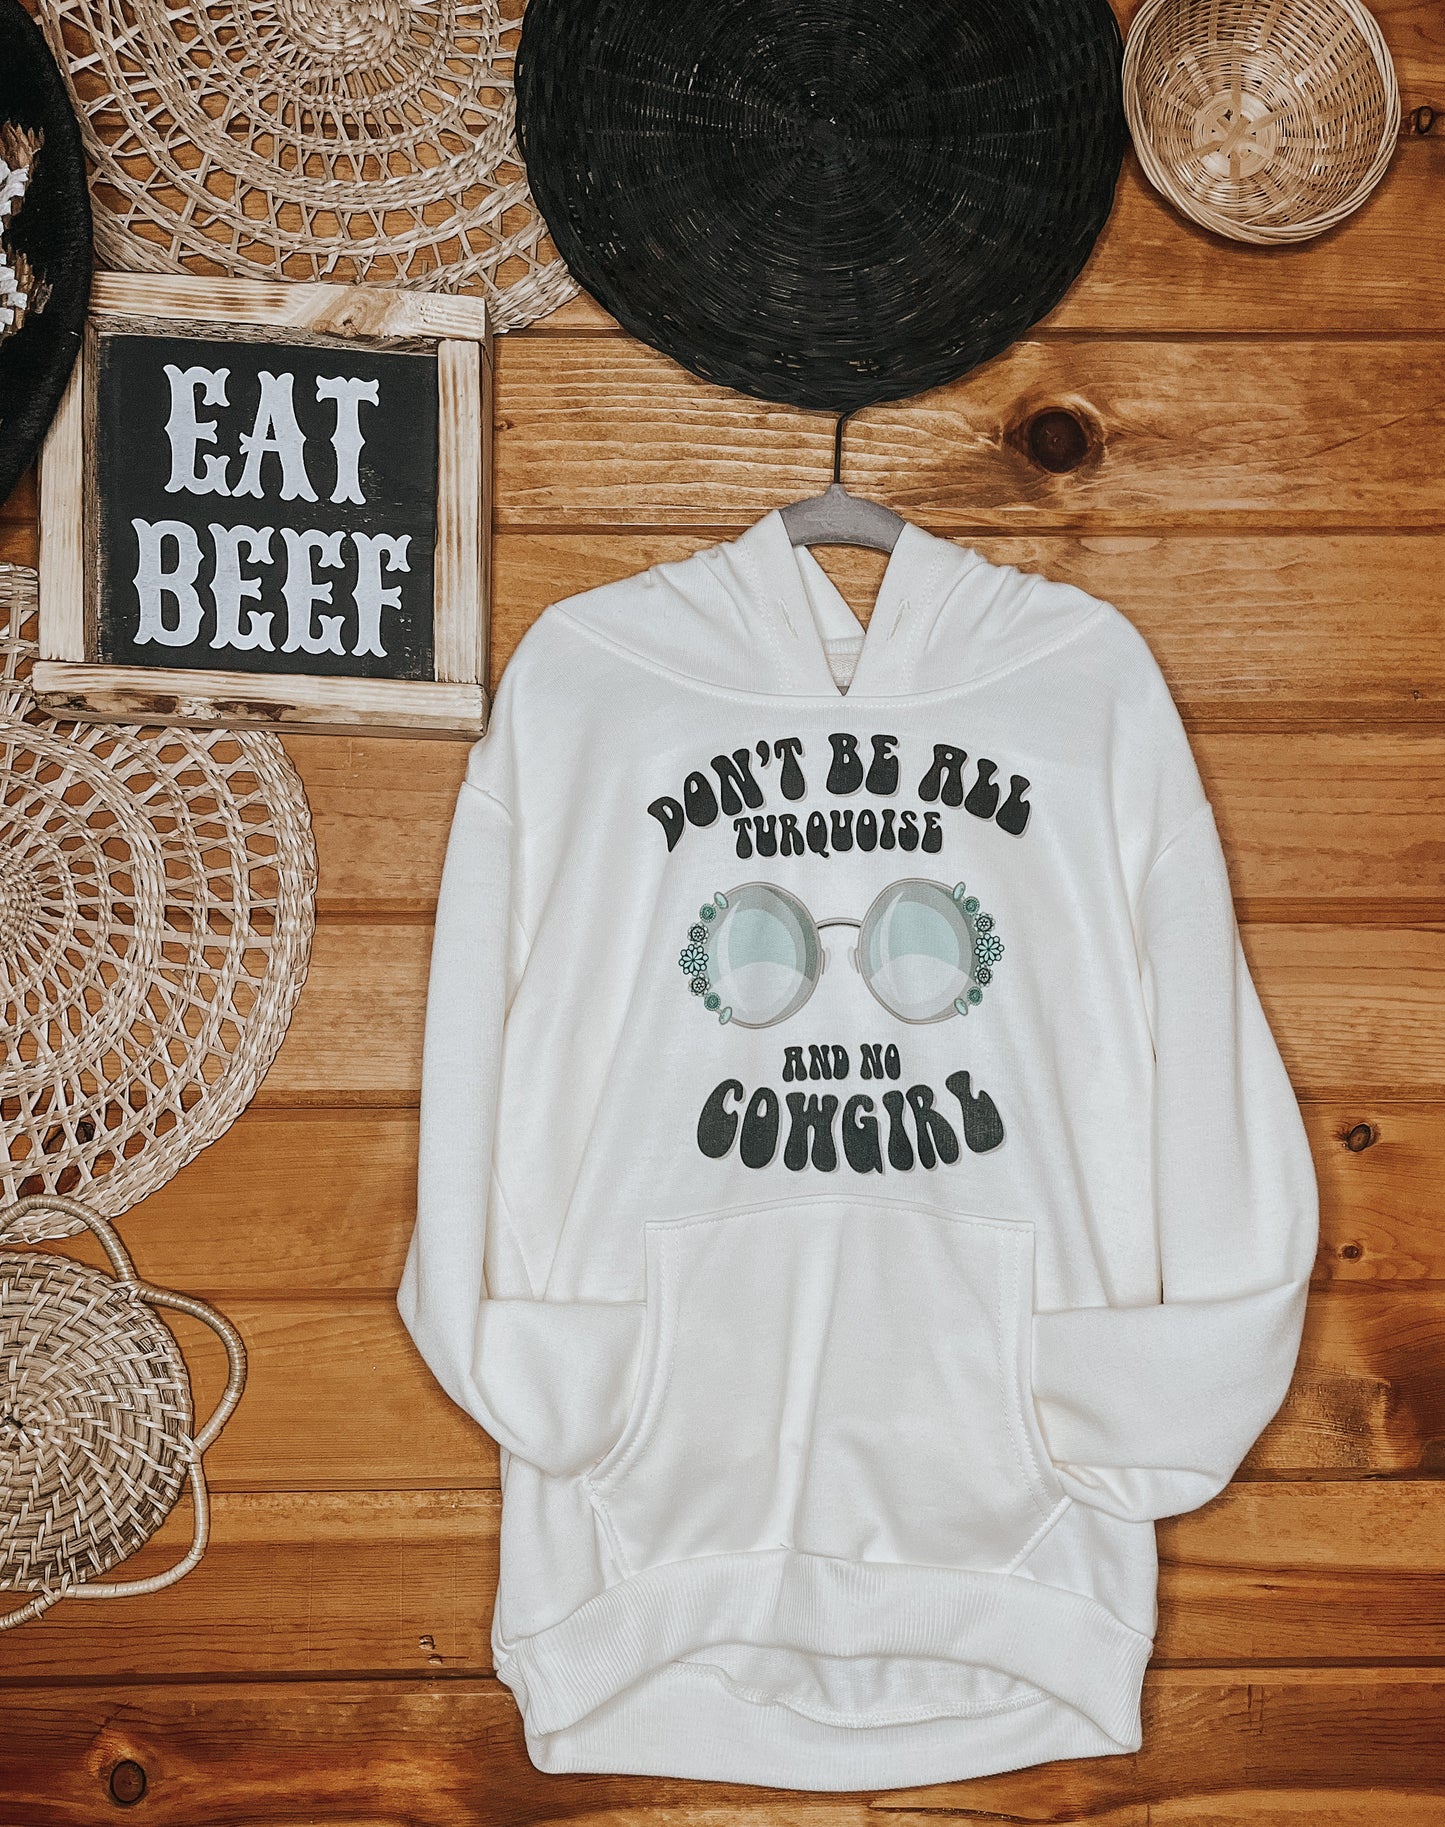 the Don't Be All |Turquoise| + No Cowgirl ladies